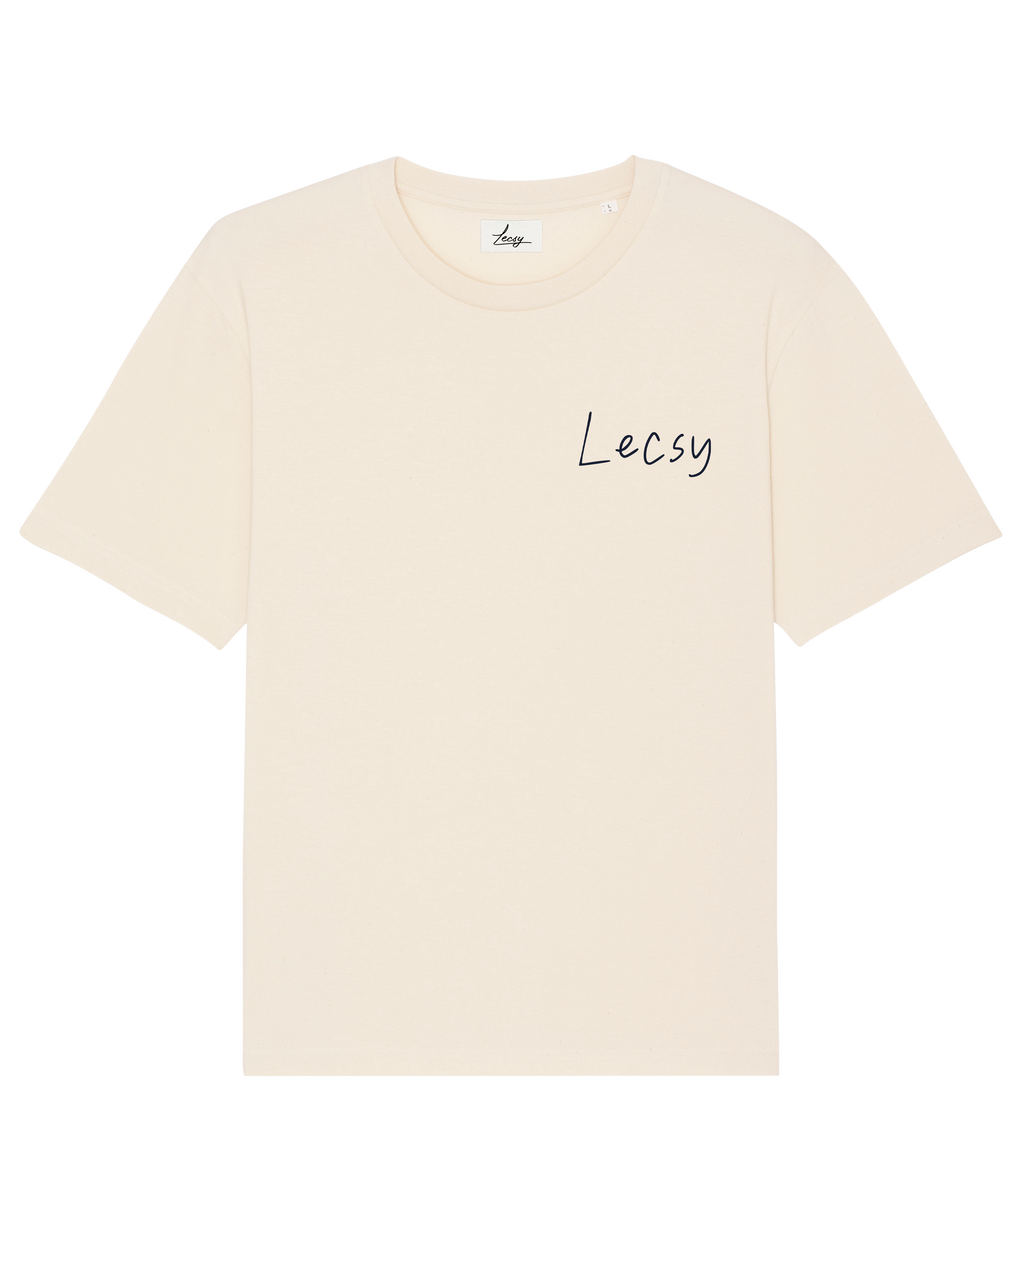 T-shirt Unisex The Cloud Natural Raw T-shirt Lecsy 